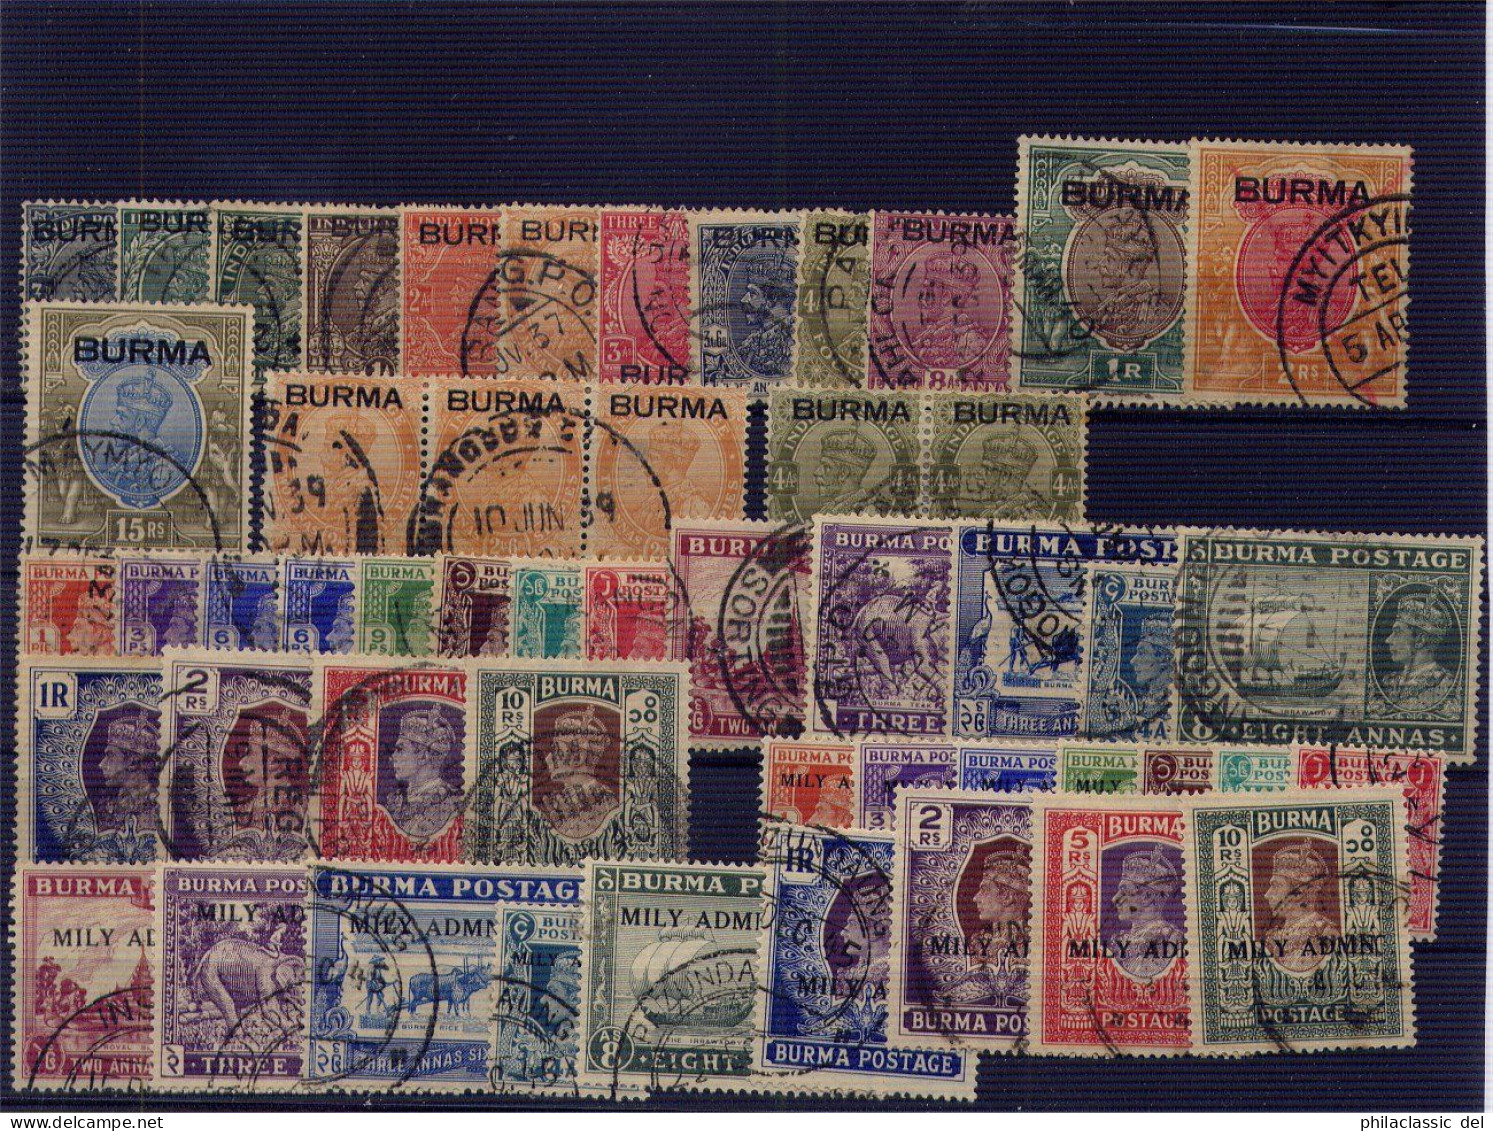 BURMA 1938 - 1954, Very Nice Nearly Complete Collection Fine Cancelled Cat Val 1150 Pounds - Burma (...-1947)